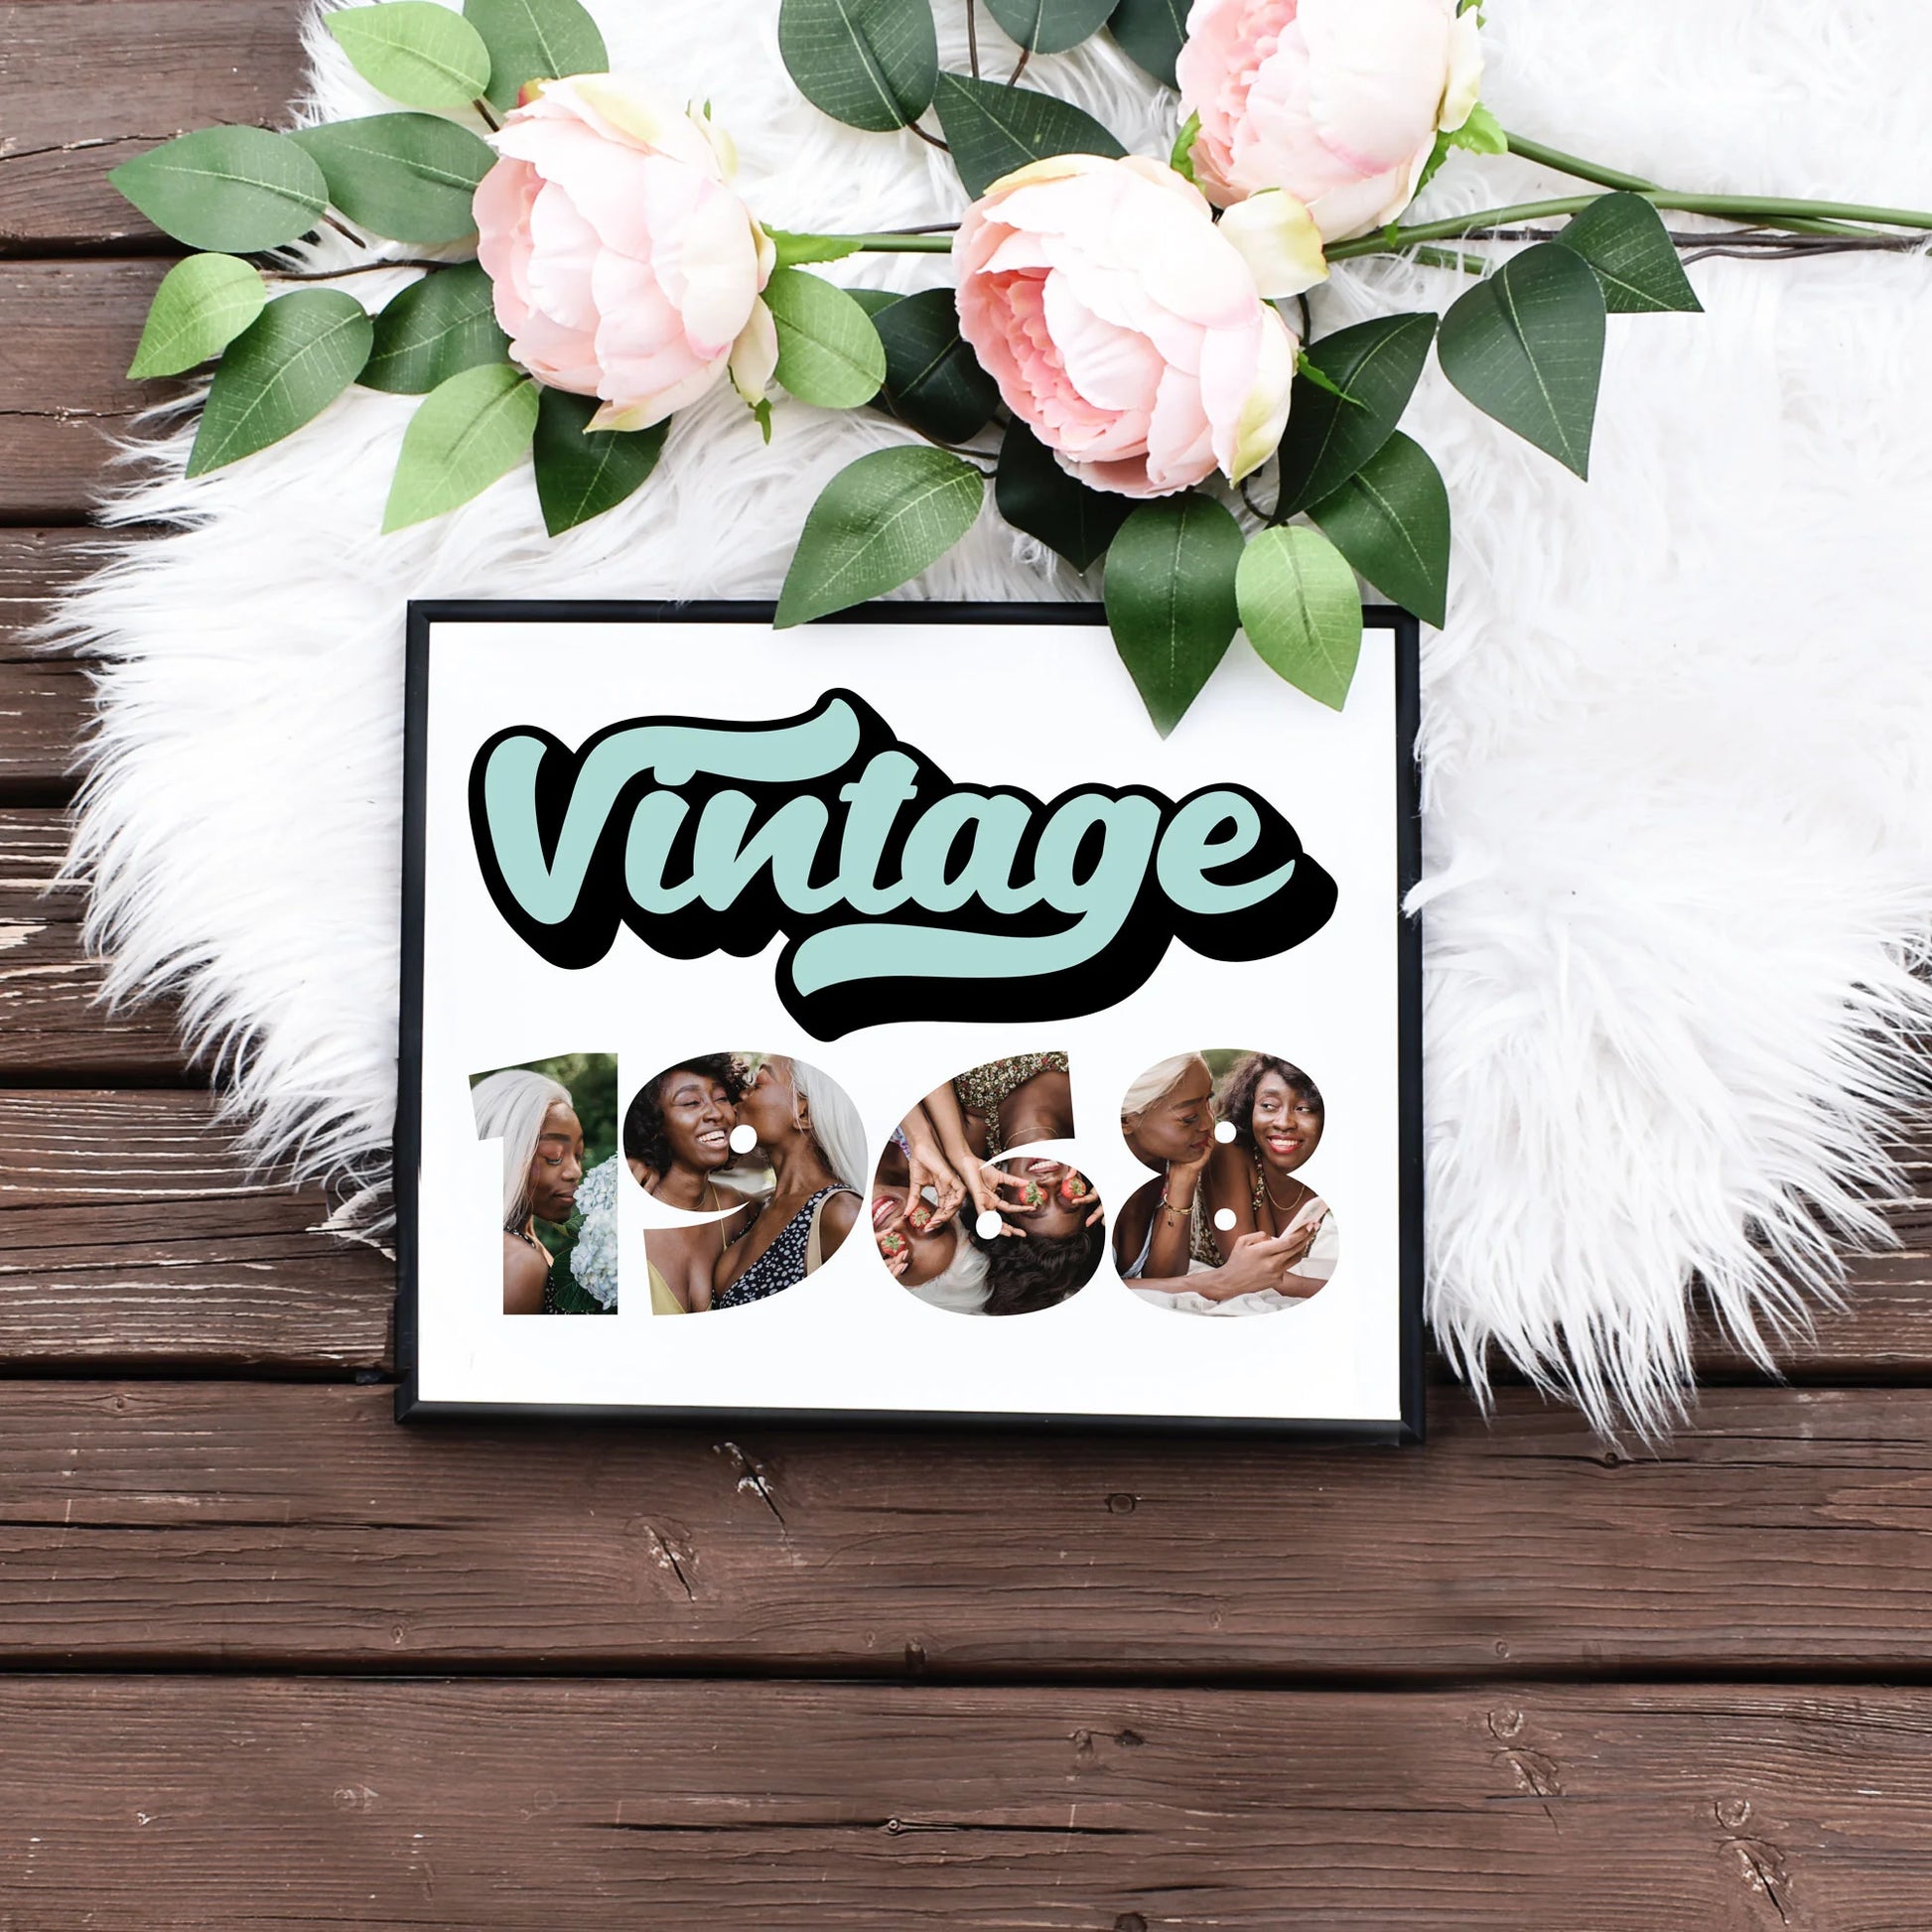 Editable Vintage 1968 Photo Collage Template by Playful Pixie Studio